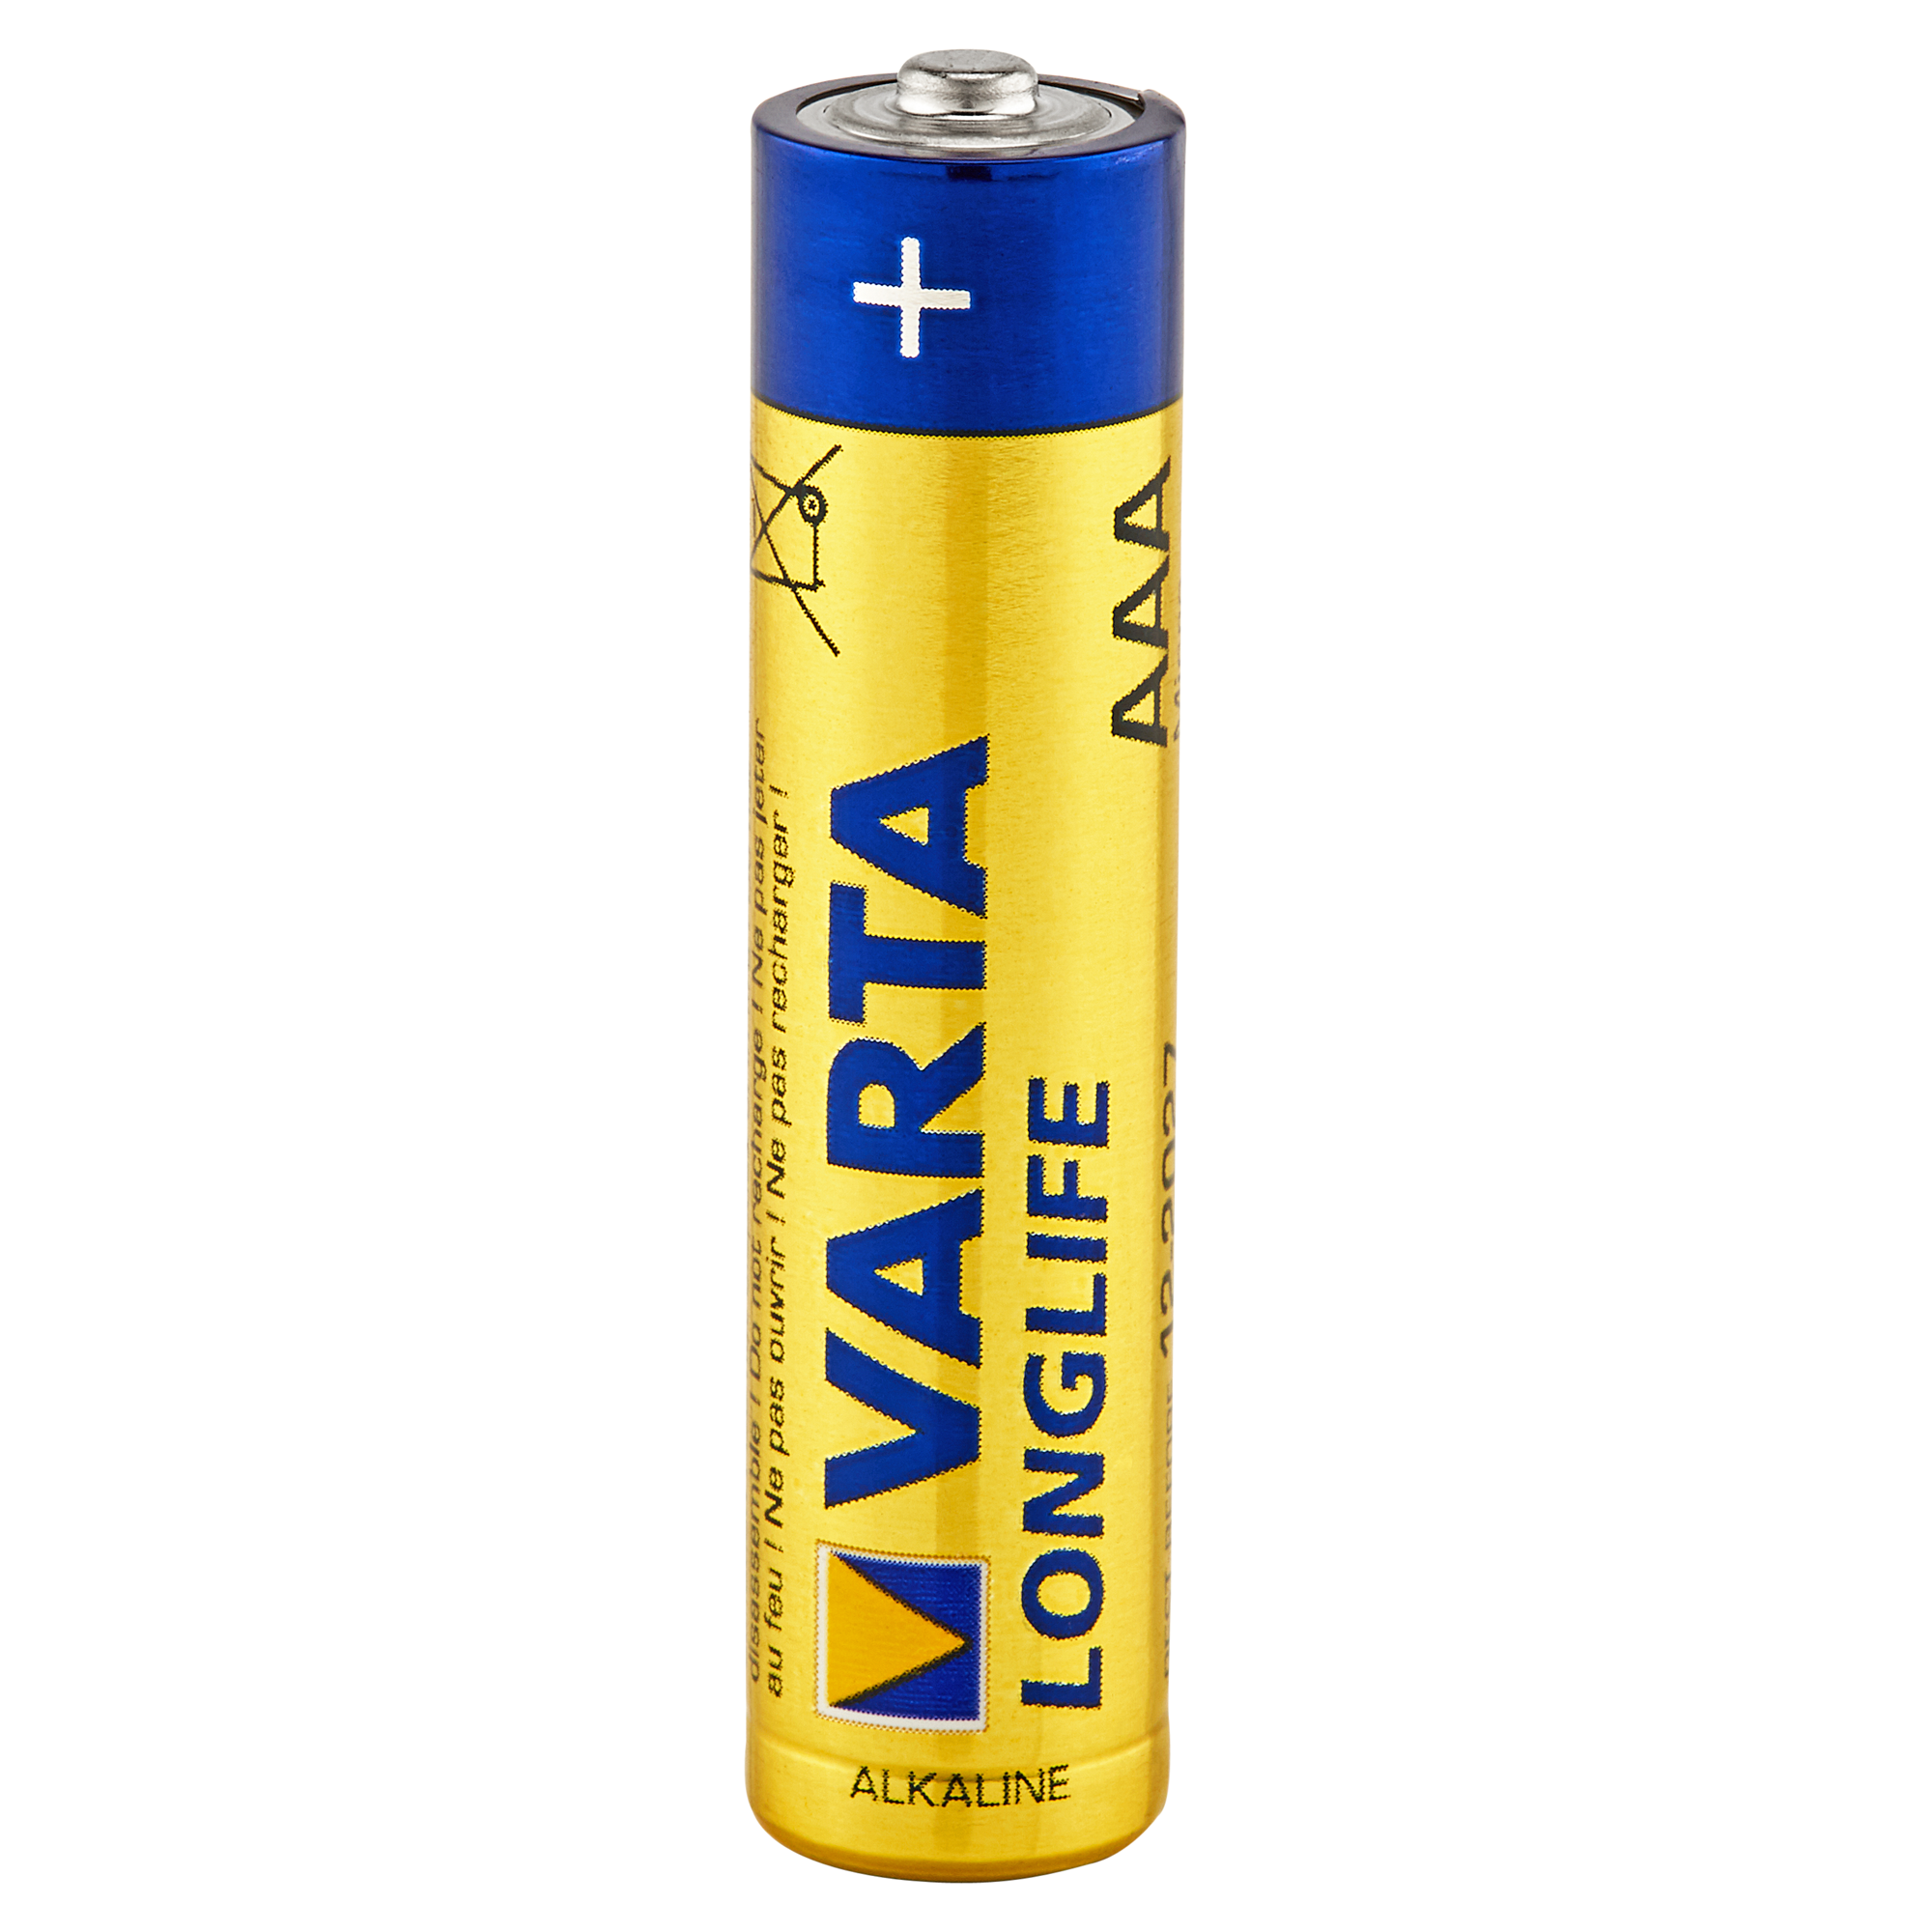 aaa battery service number